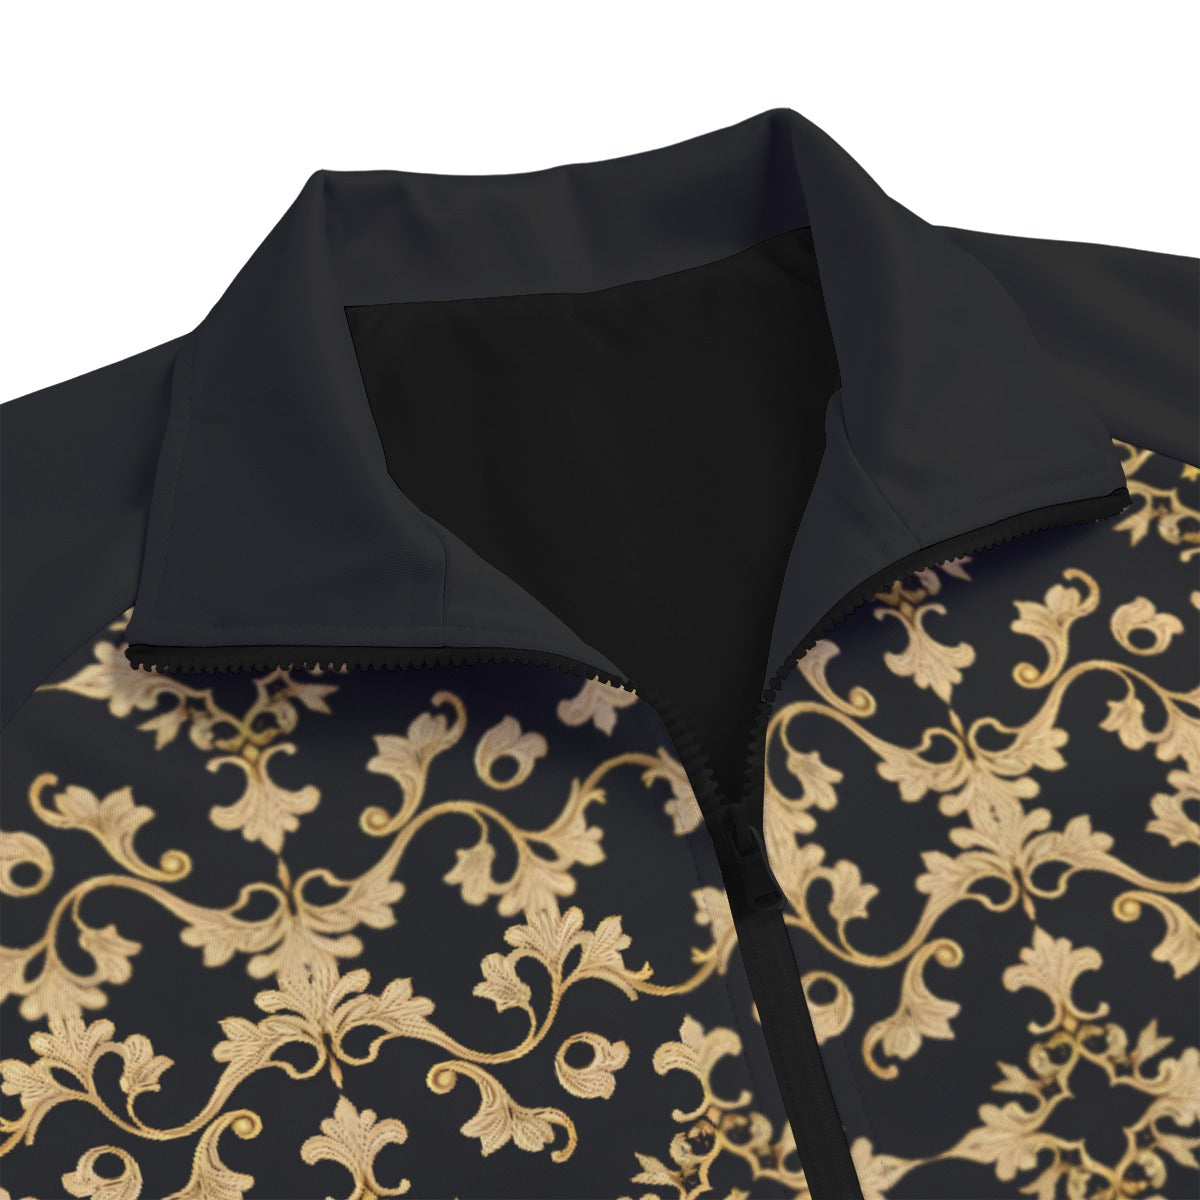 AC BAROQUE All-Over Print Unisex Stand Collar Black Lining Jacket